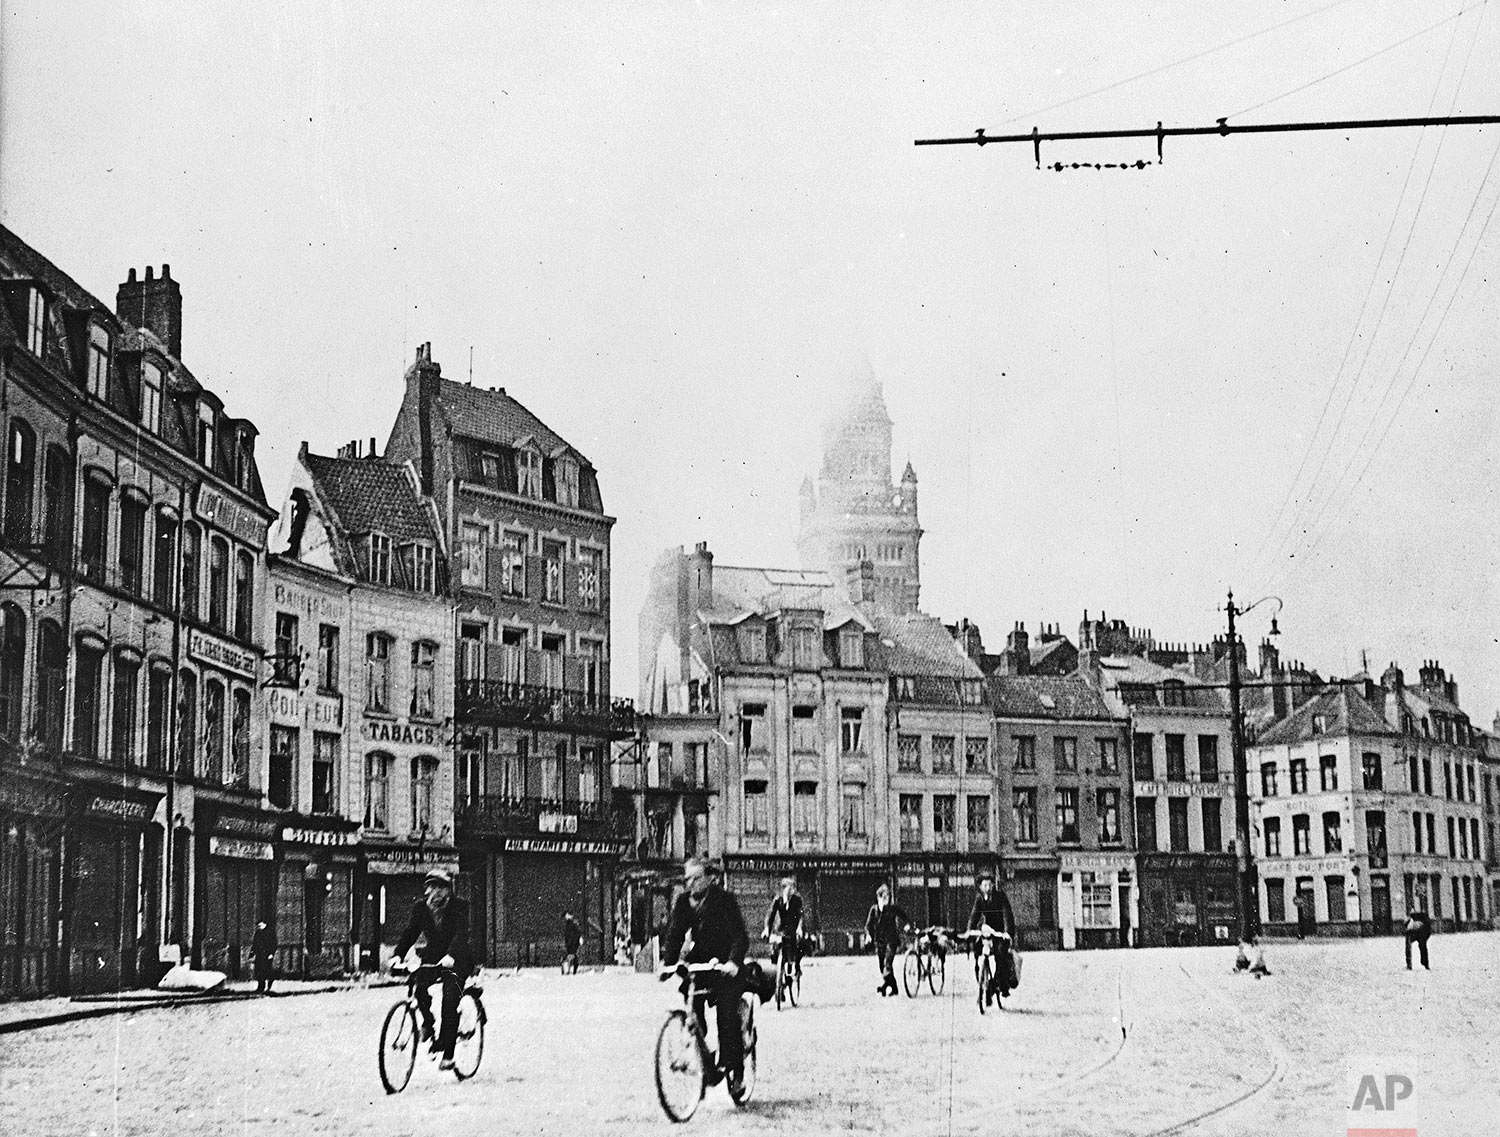  Houses in this Dunkirk, France, square had been deserted and most of the town had been destroyed in this photo, showing the last civilians in the town hurrying across the square en route to the waterfront to seek passage aboard boats bound for other